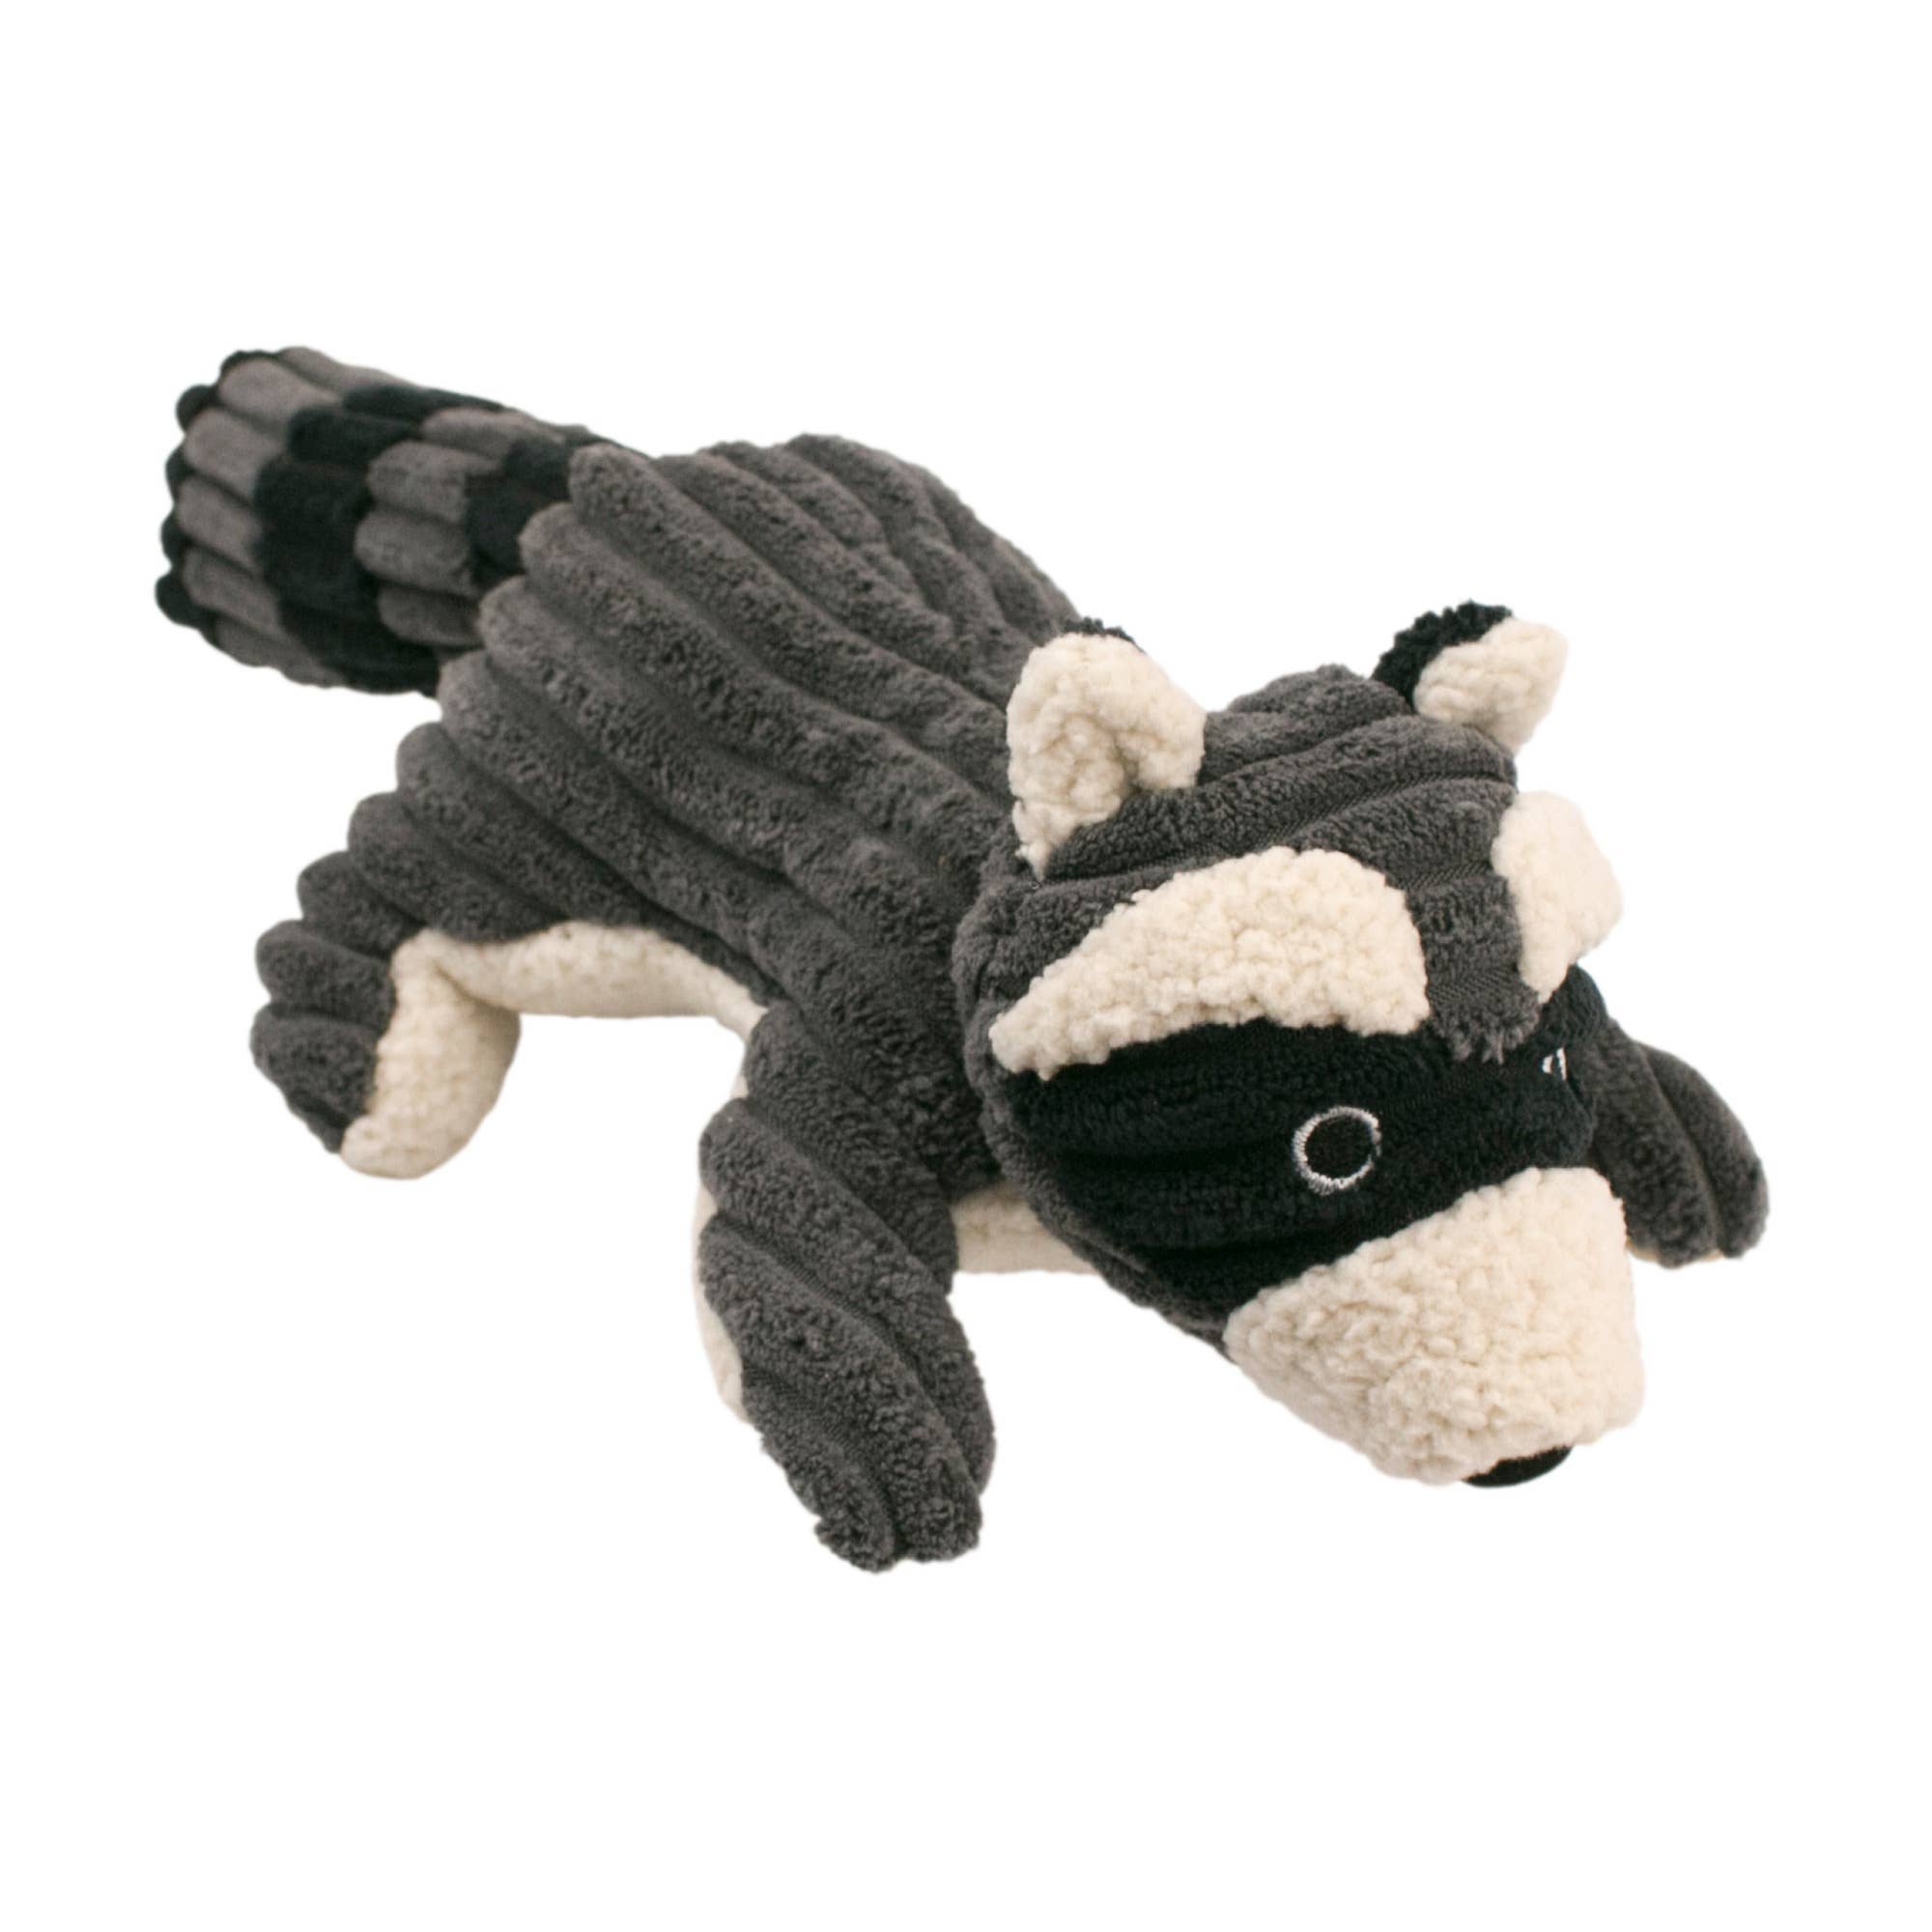 Tall Tails - 12" Plush Raccoon Squeaker Dog Toy